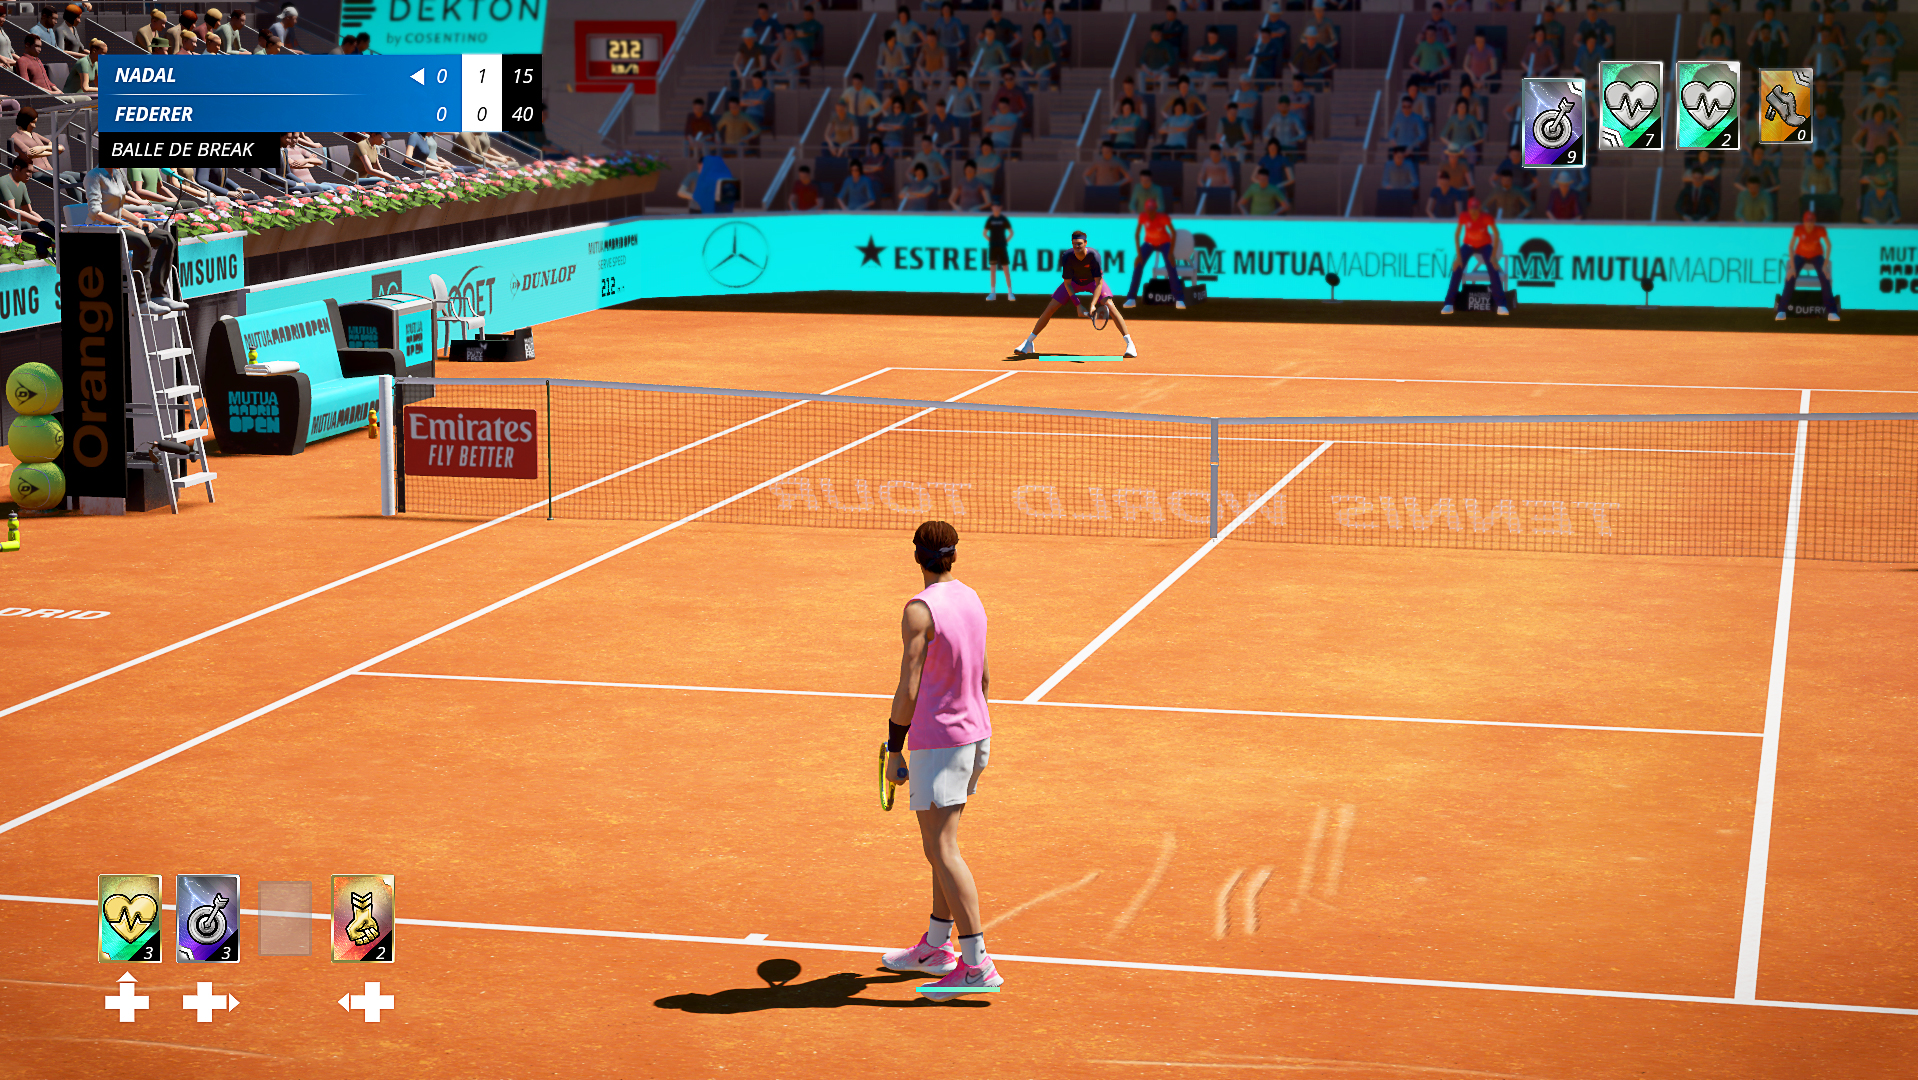 Announced for Xbox: Tiebreak: Official game of the ATP, WTA